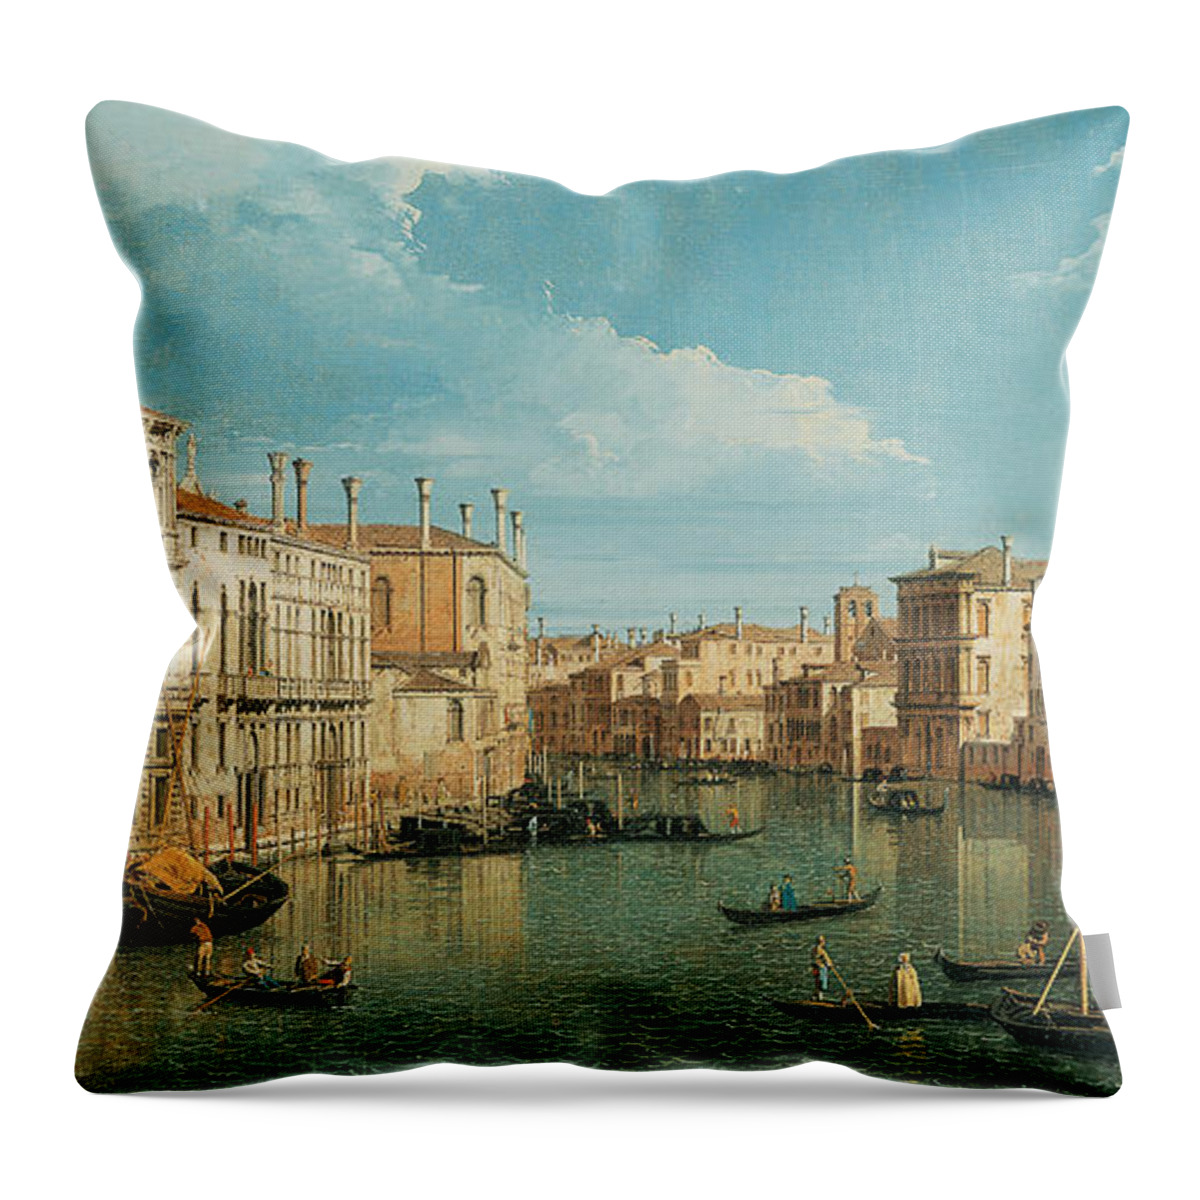 Canaletto Throw Pillow featuring the painting The Grand Canal by Canaletto